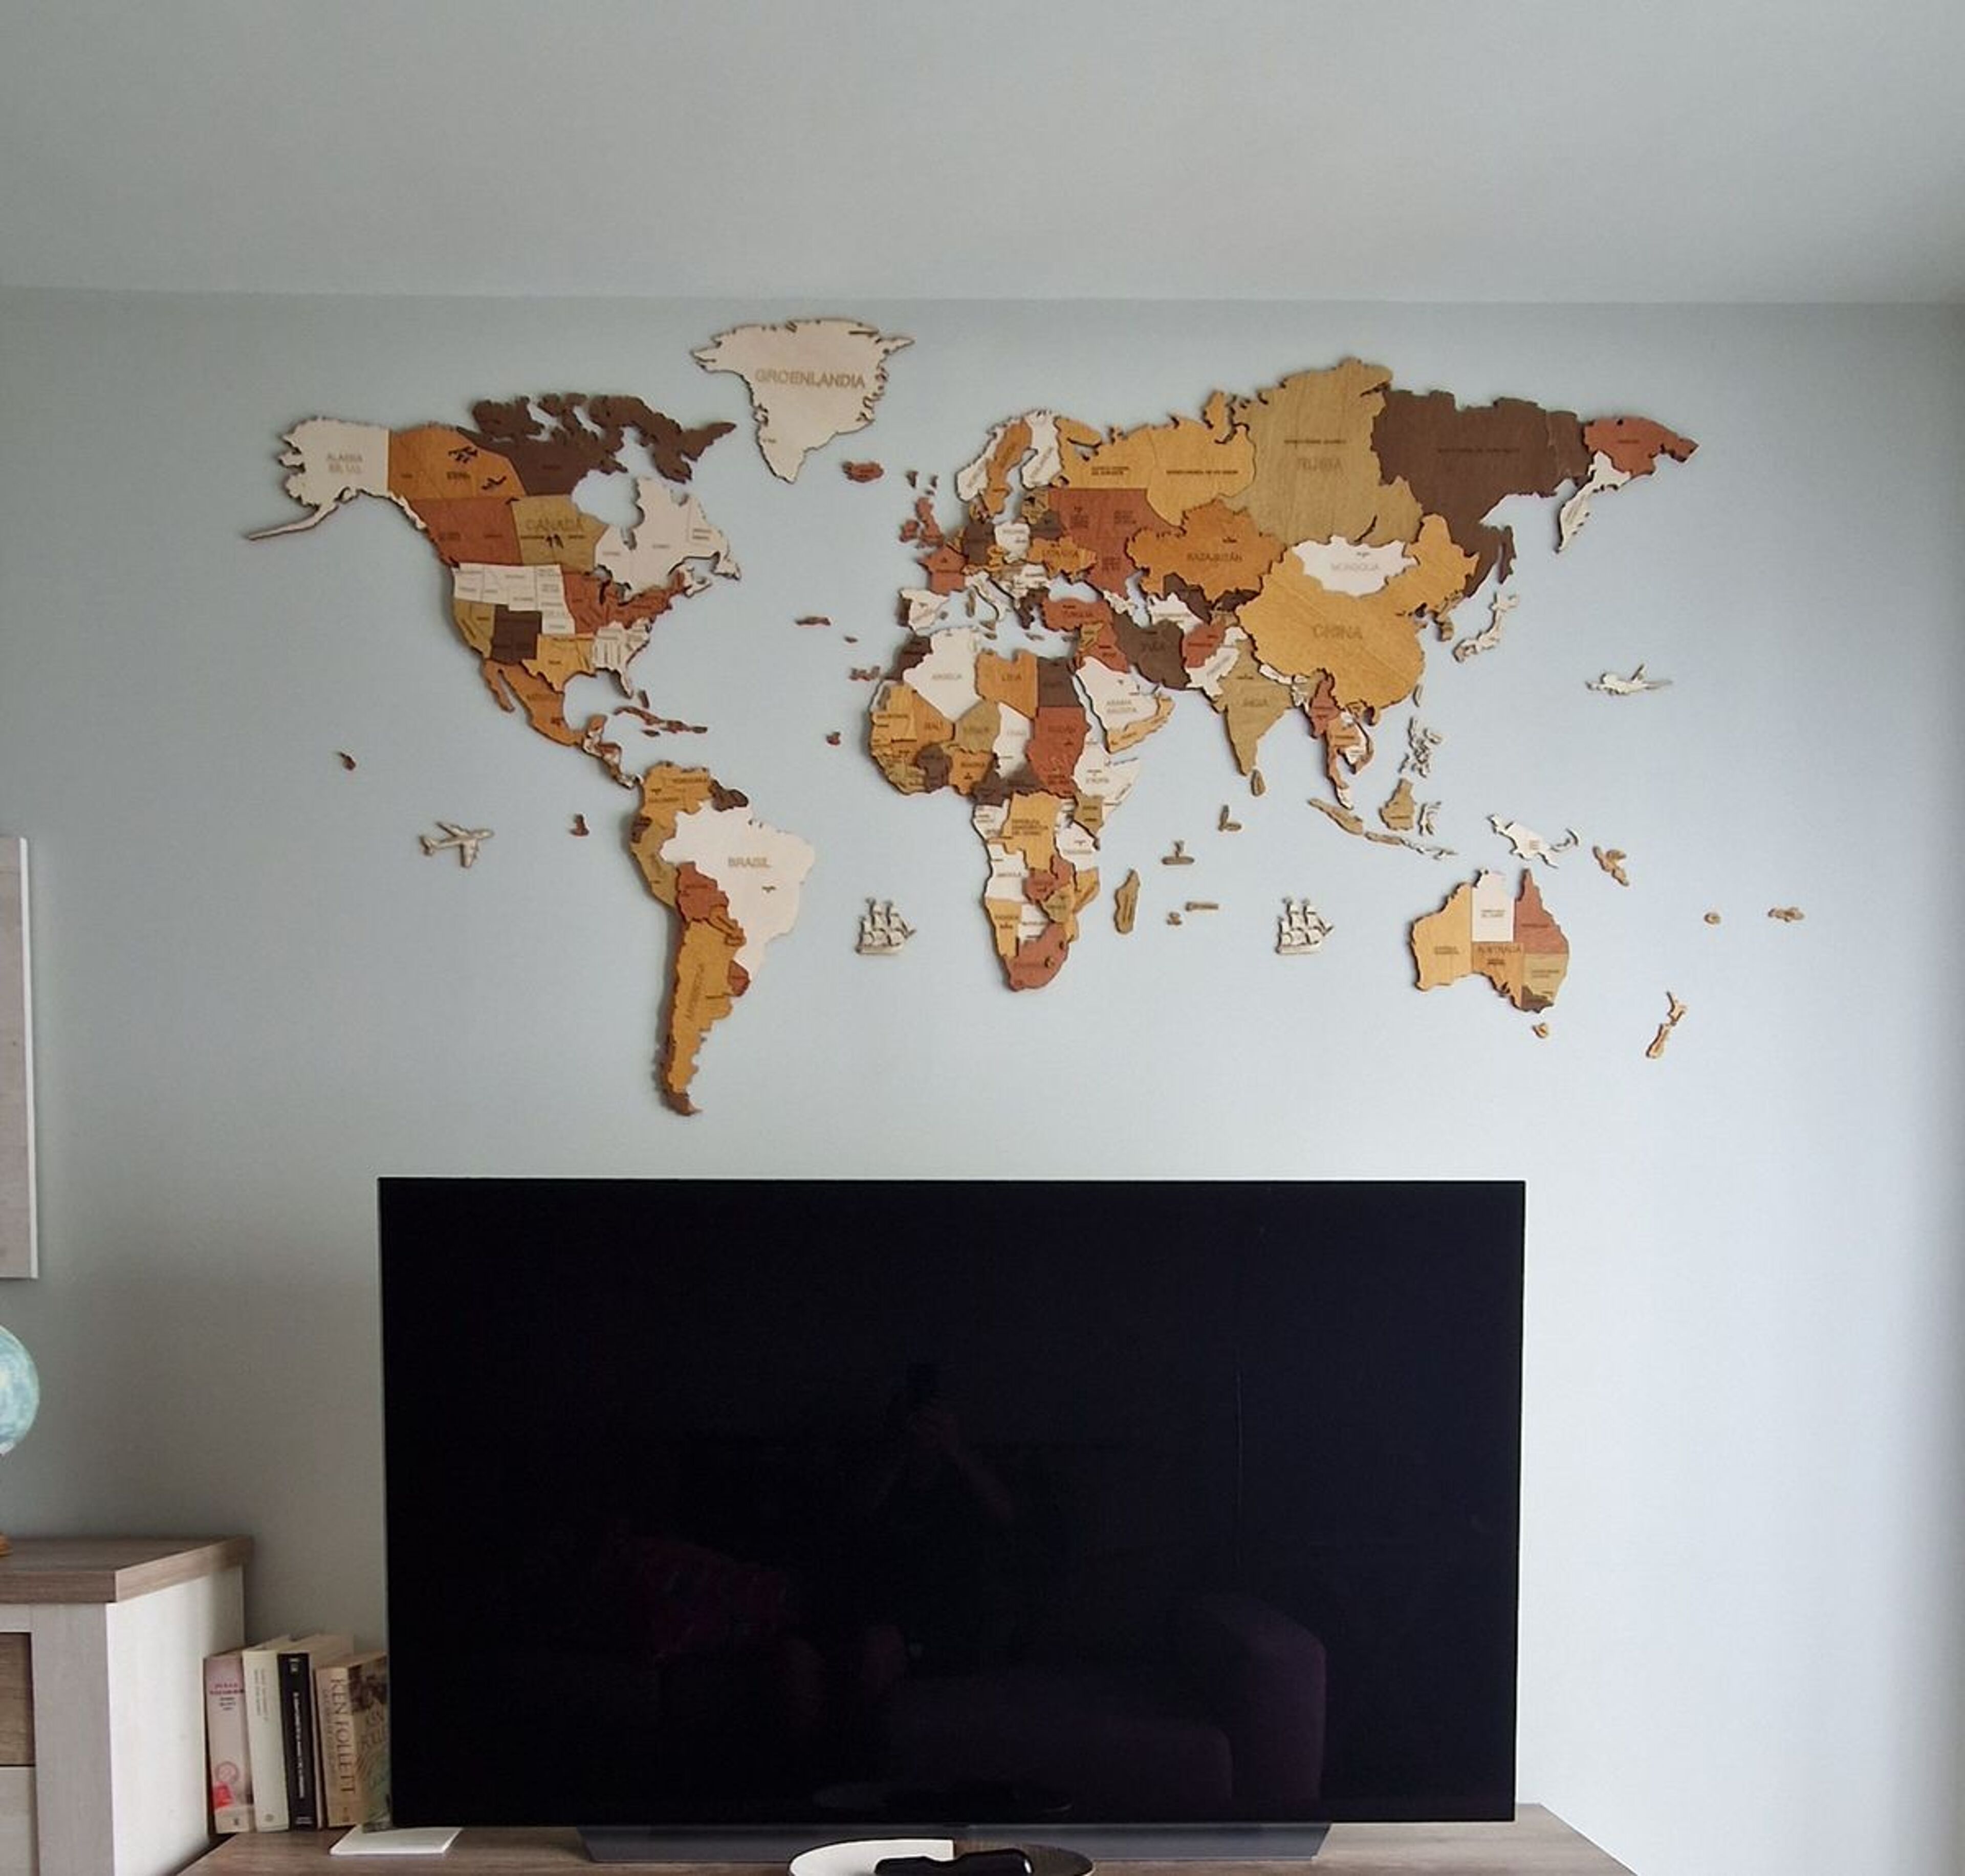 Review for Wooden World Map Wall Decoration - image from Luis Alberto S.